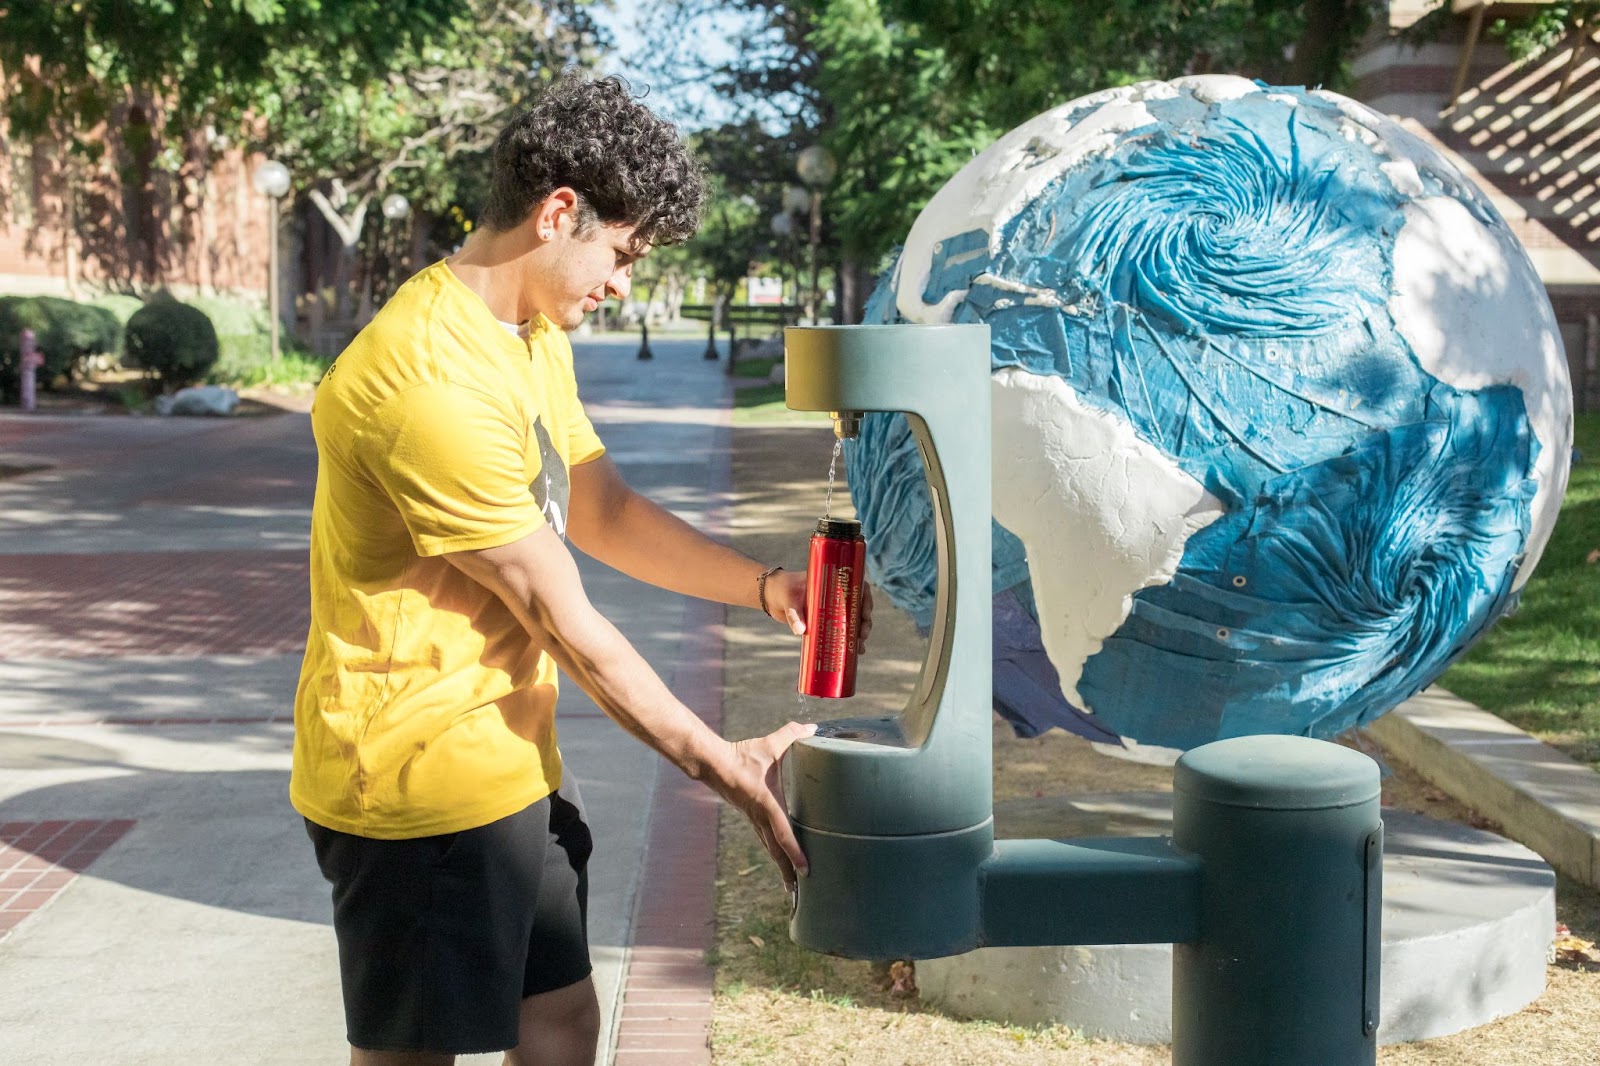 A student filling his water bottle at a water filling station.